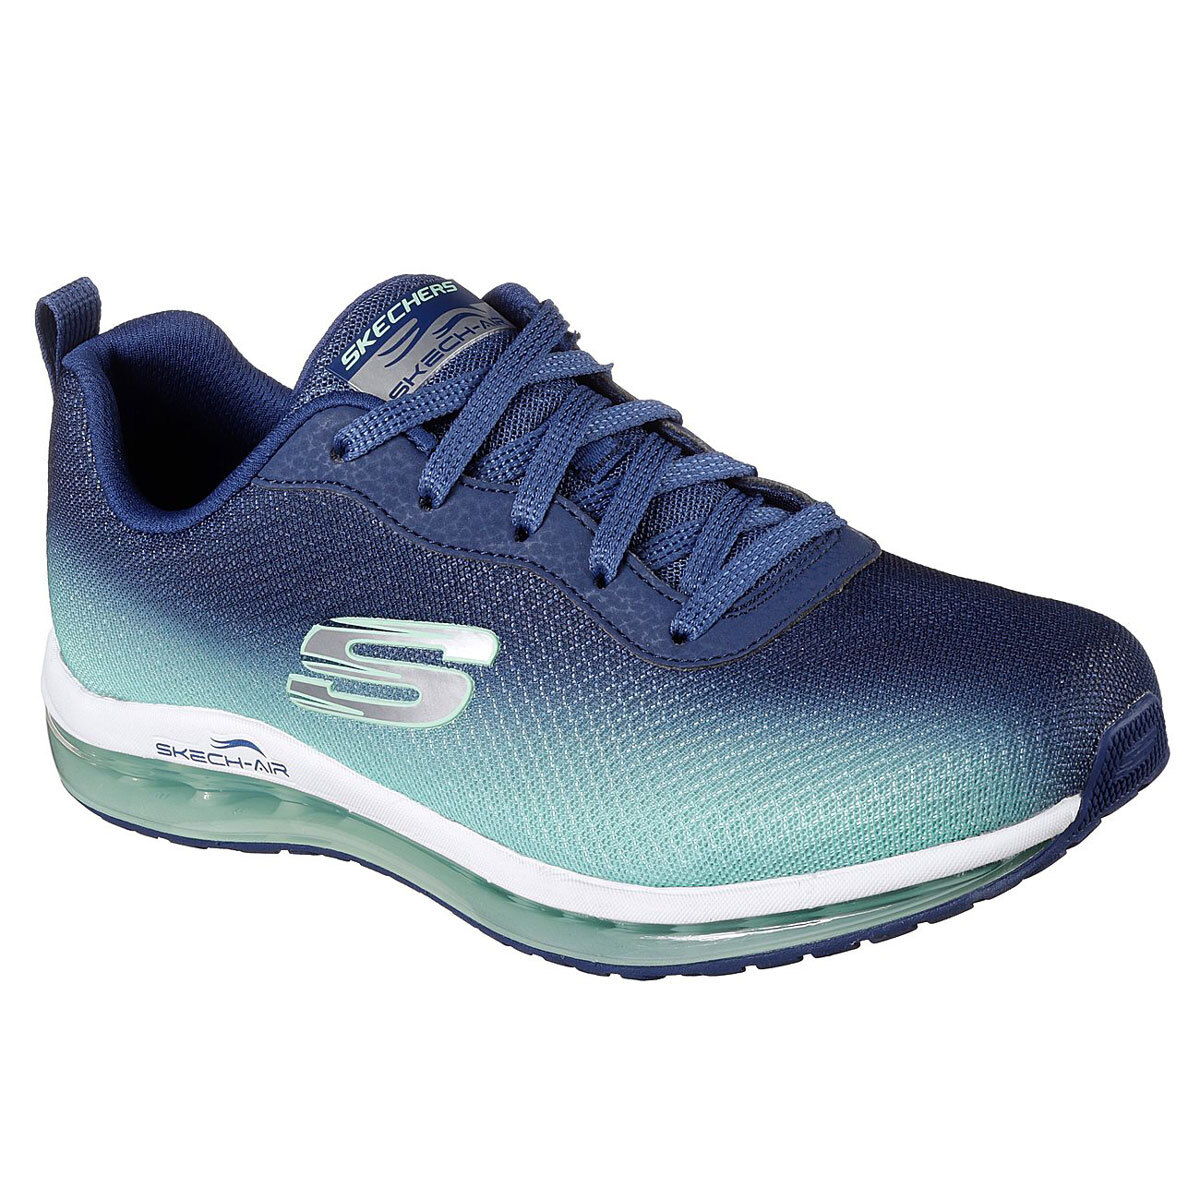 blue and green skechers